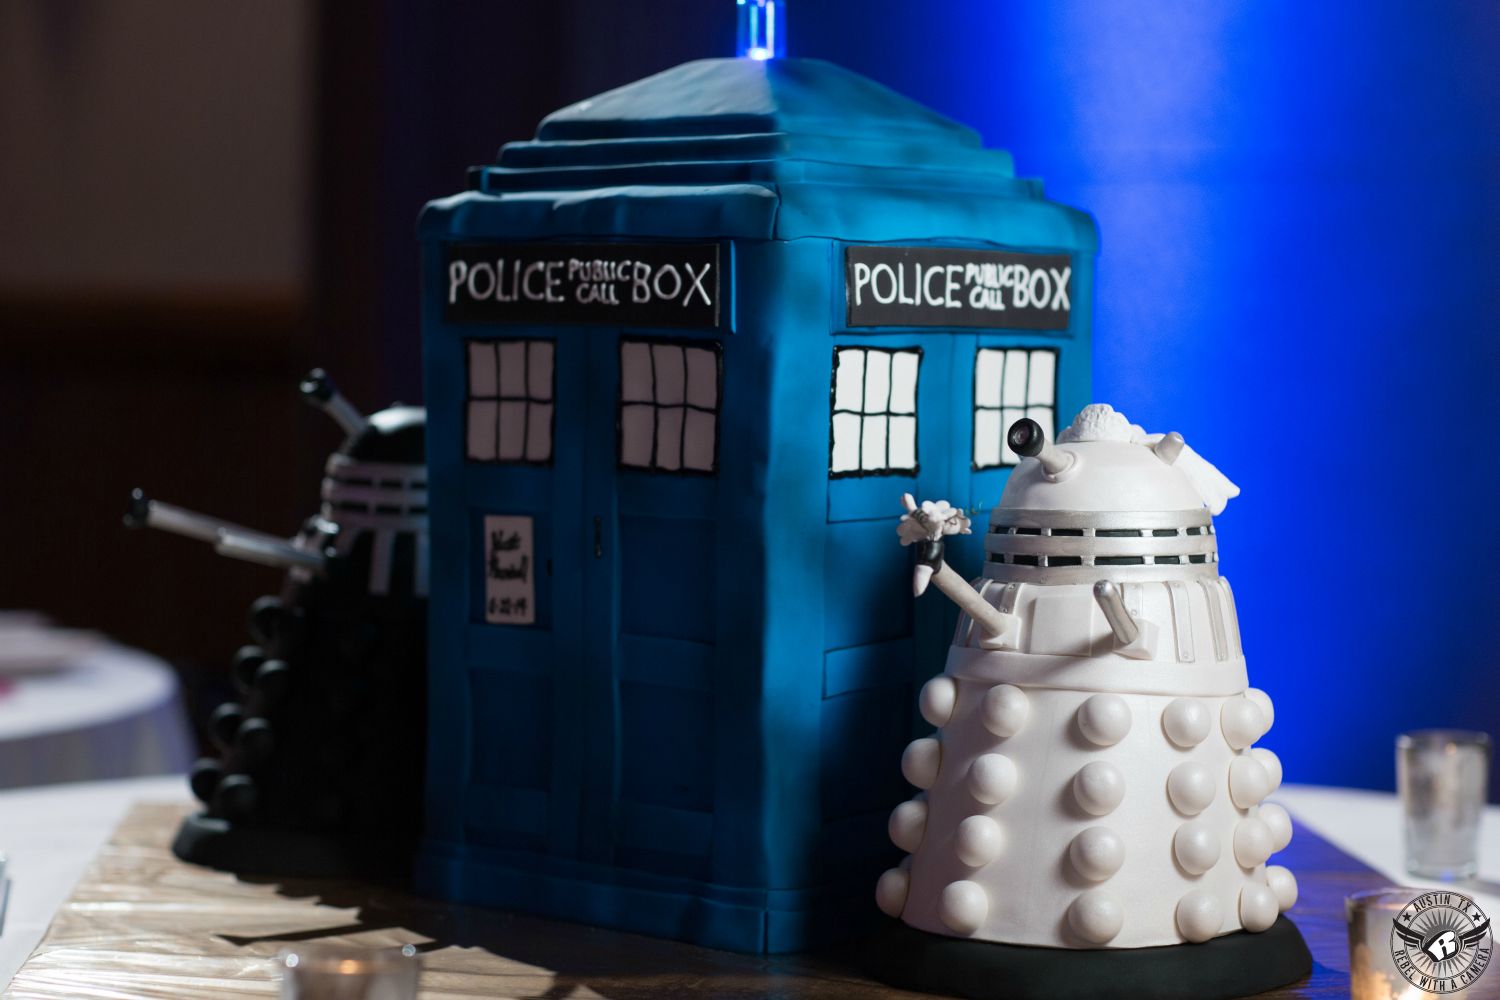 Picture of Dr Who TARDIS wedding cake with bride and groom Daleks by  The Cake Plate Austin with royal blue uplighting coordinated by Barbara's Brides at the AT&T Executive Education and Conference Center taken by Austin wedding photographer.